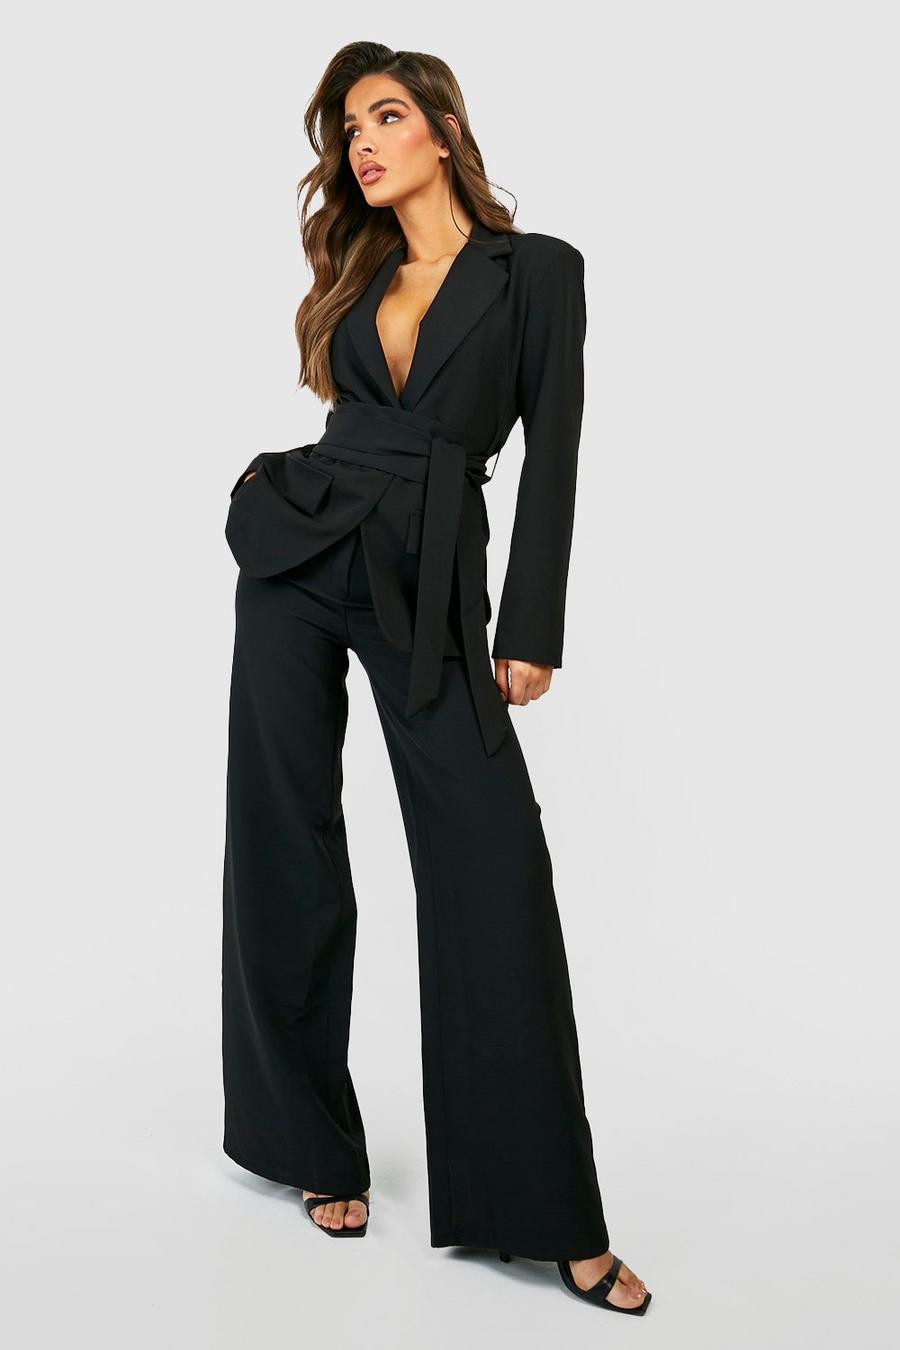 Black Straight Leg Seam Front Tailored Trousers